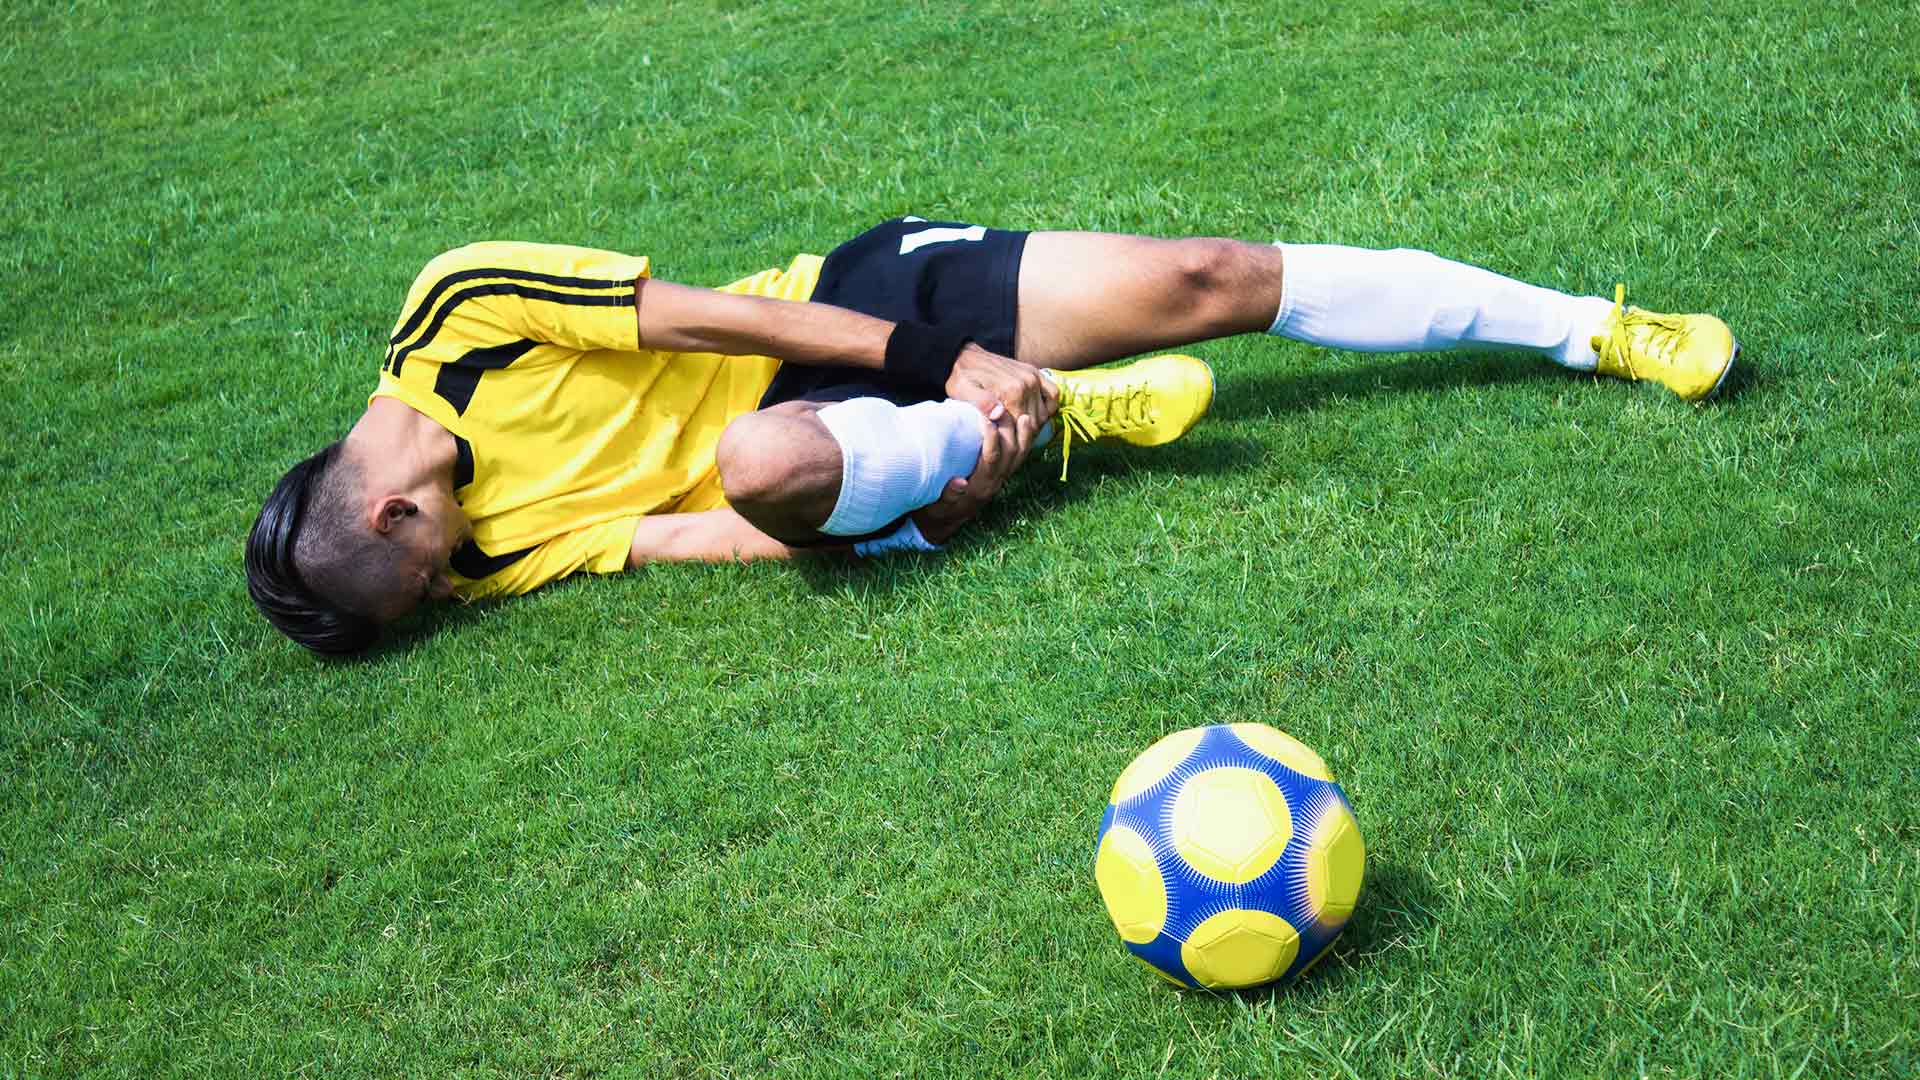 What It Takes for Injured Soccer Players To Get Back on the Field